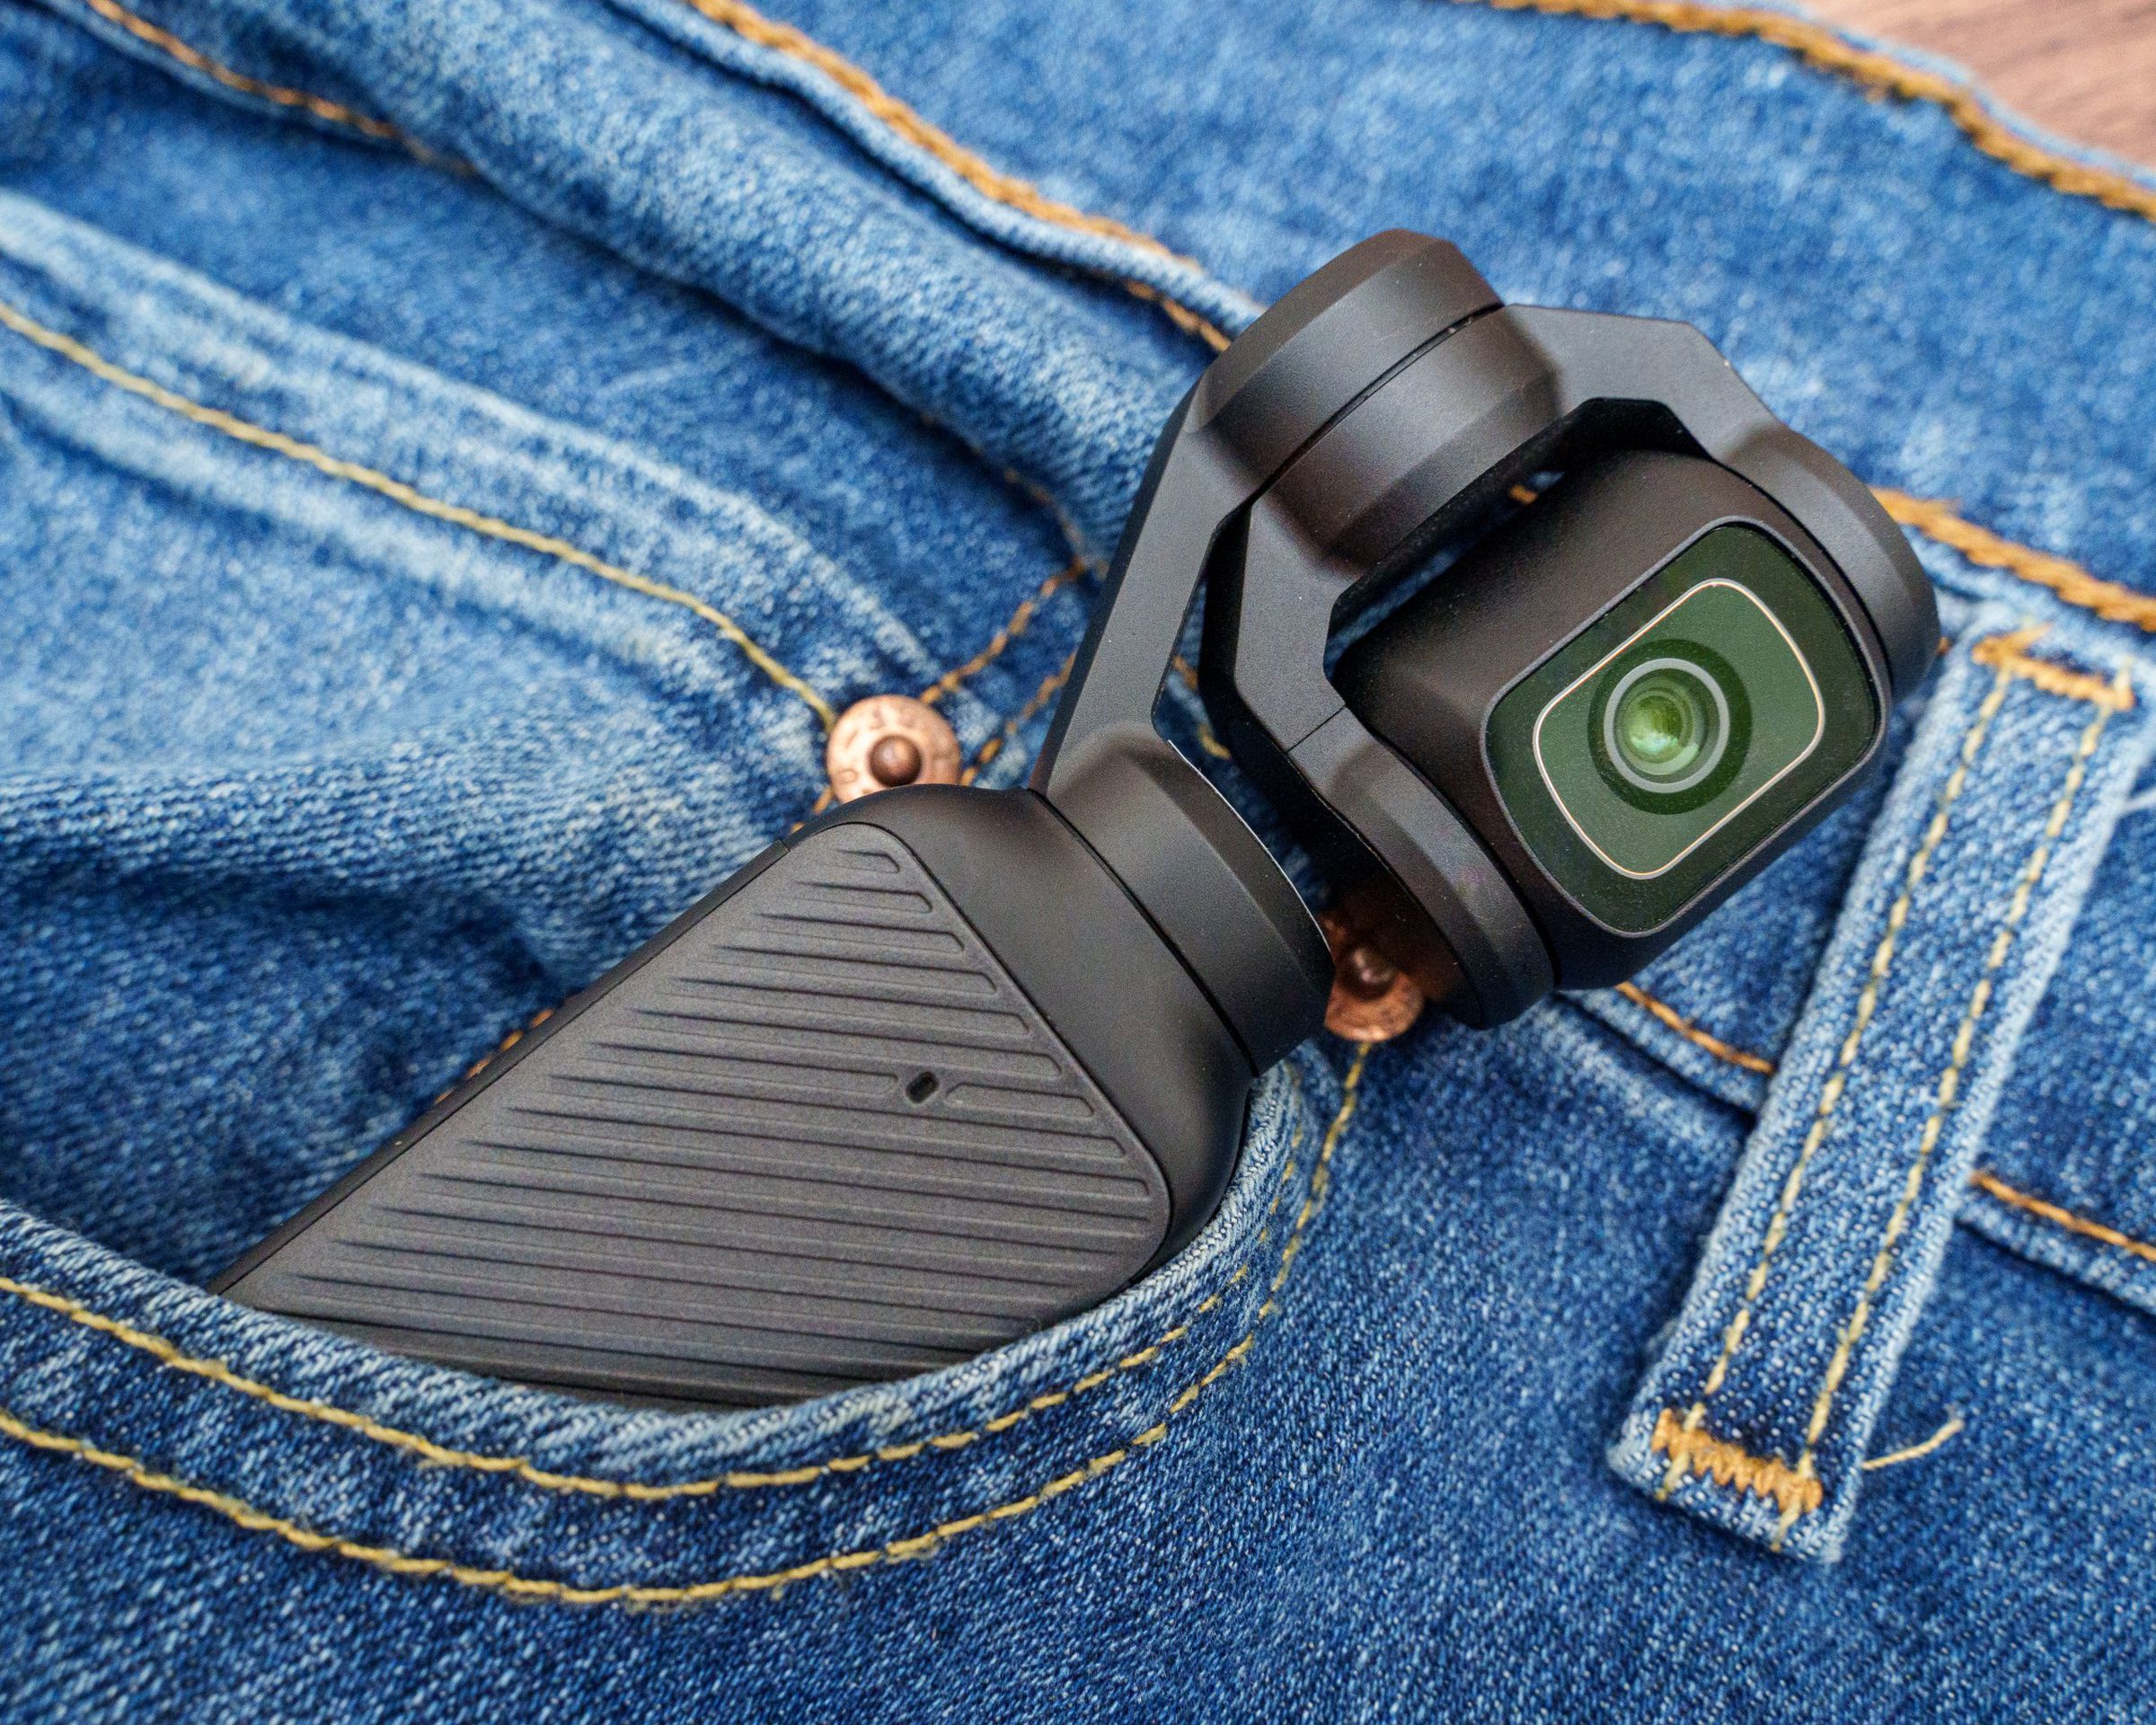 Despite its name, the Pocket 3 isn’t exactly comfortable to stuff in tighter pockets.